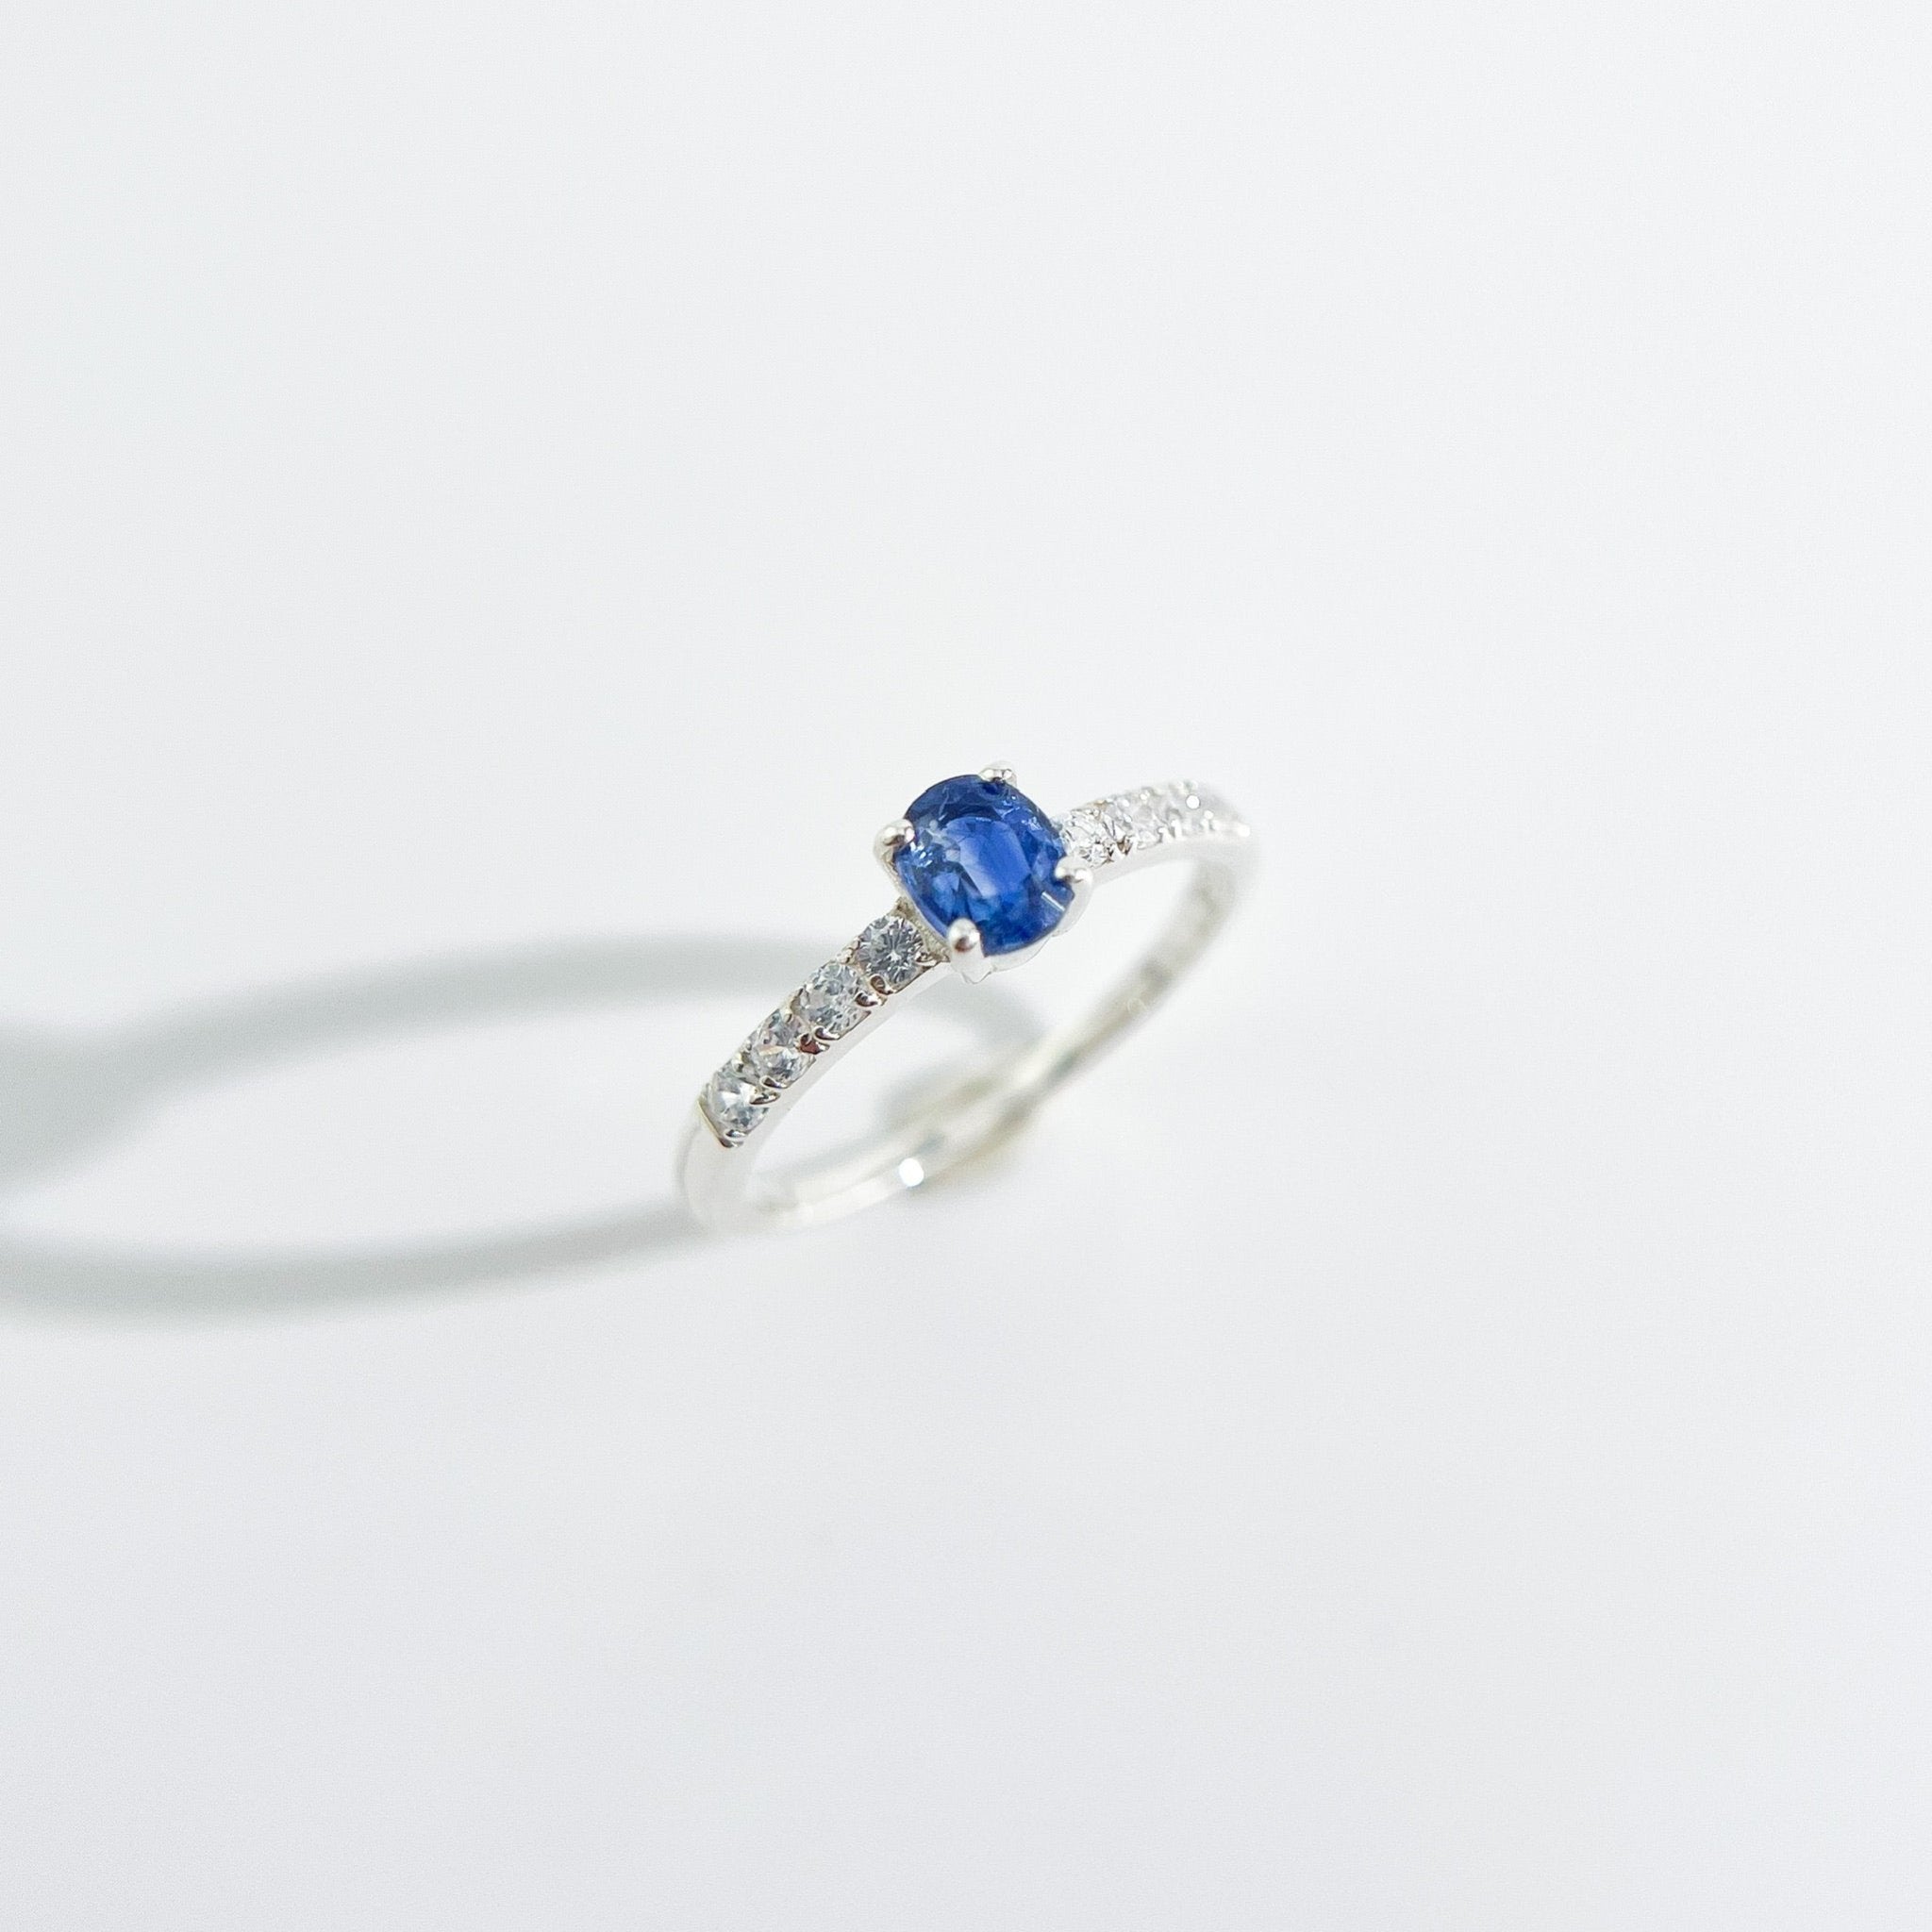 Emma Kyanite Sterling Silver Ring - Flaire & Co.